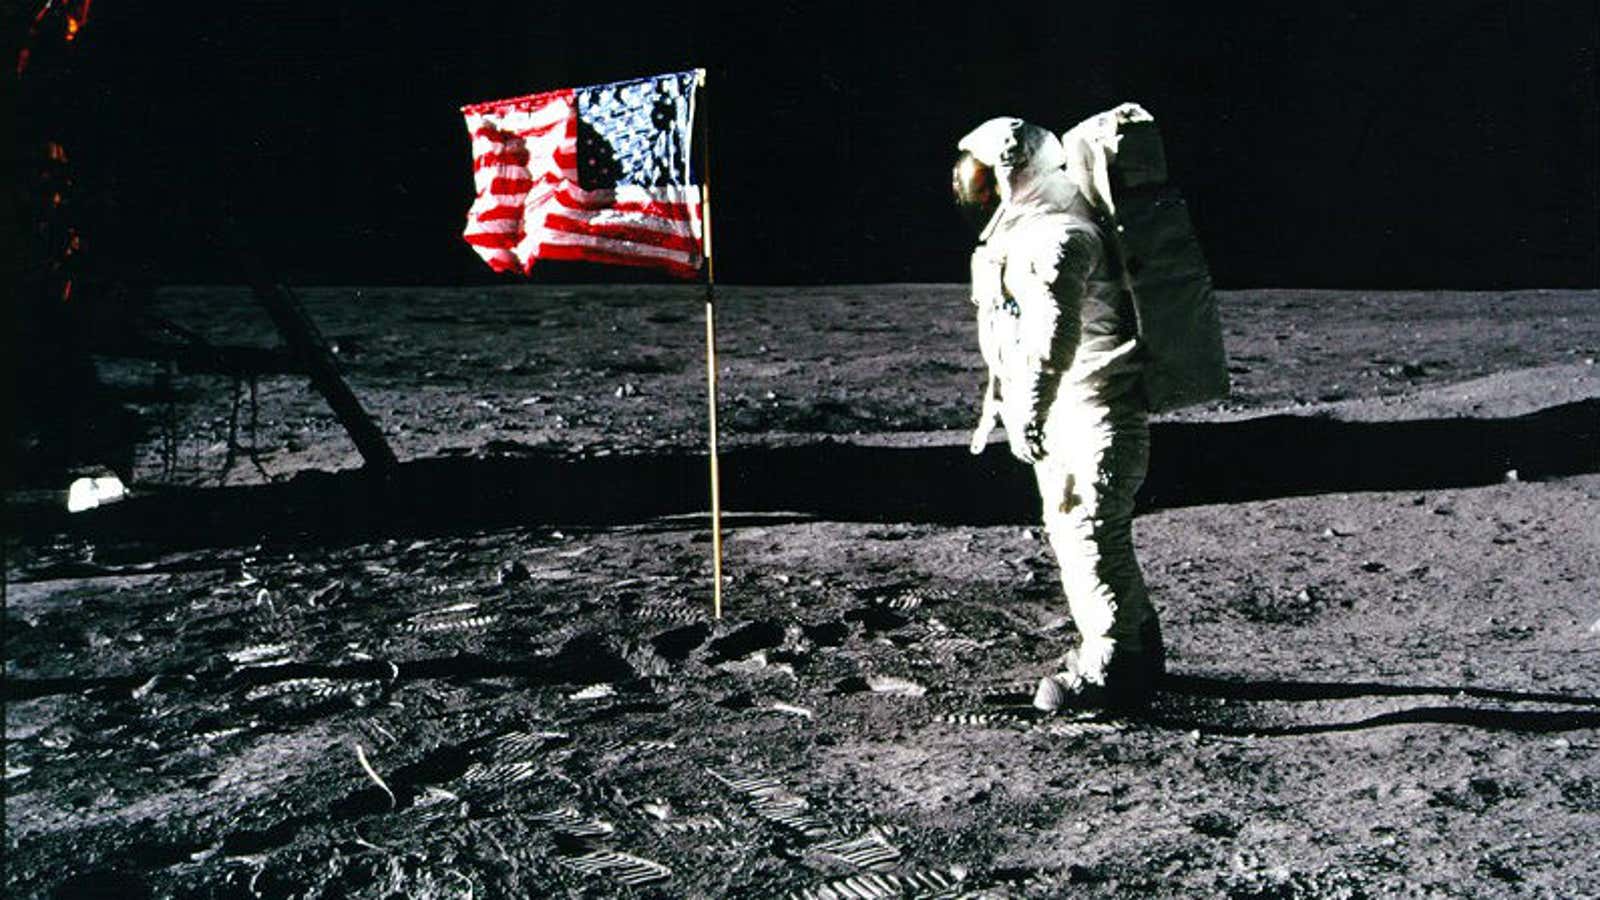 Buzz Aldrin saluting the American flag on the moon, free of charge.